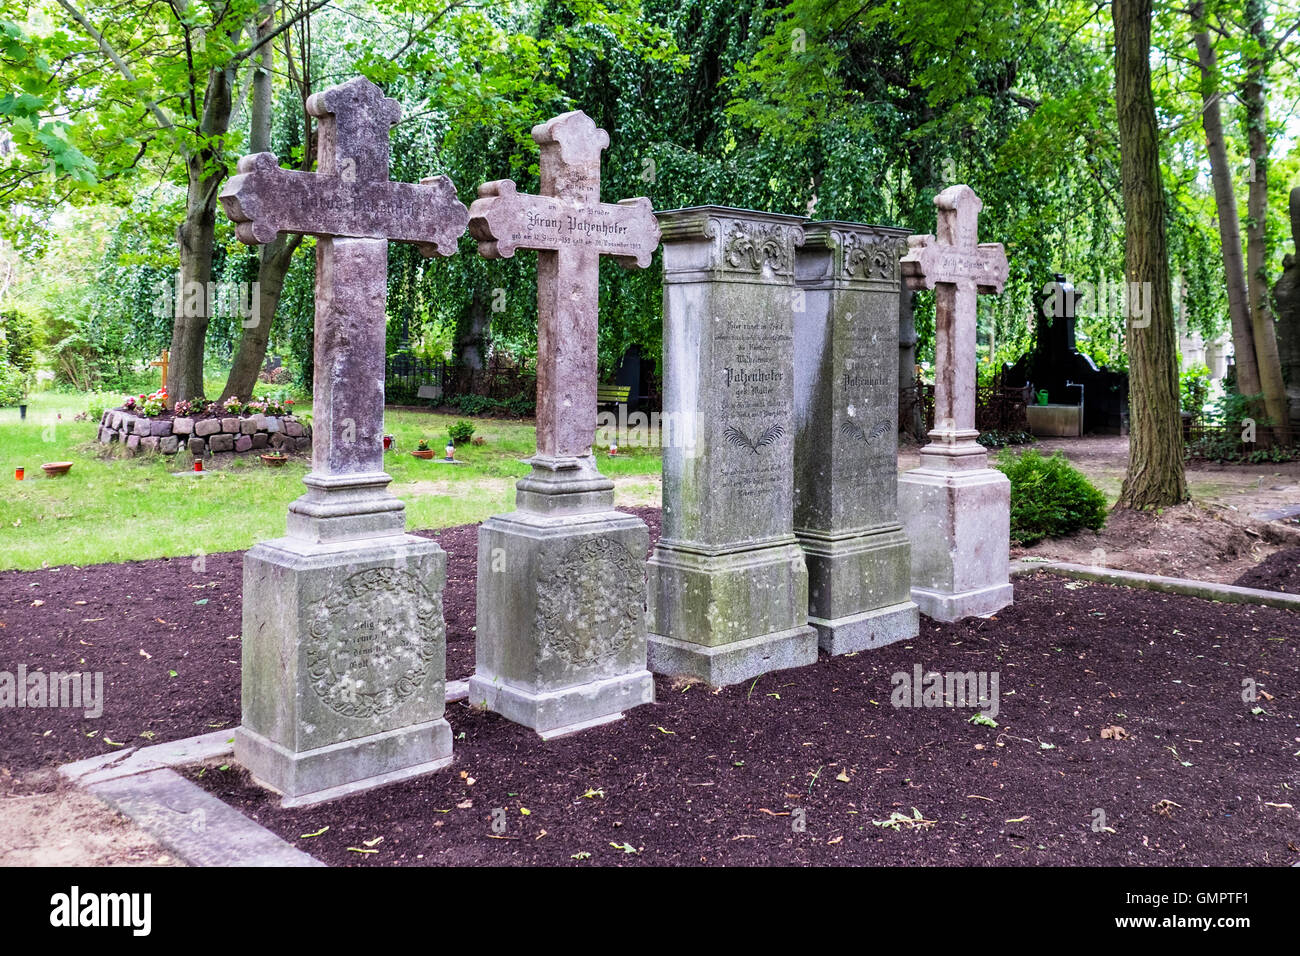 Old stone grave stones, graves and crosses at St. Hedwig Cemetery, Alter Domfriedhof St. Hedwig, Berlin. Stock Photo